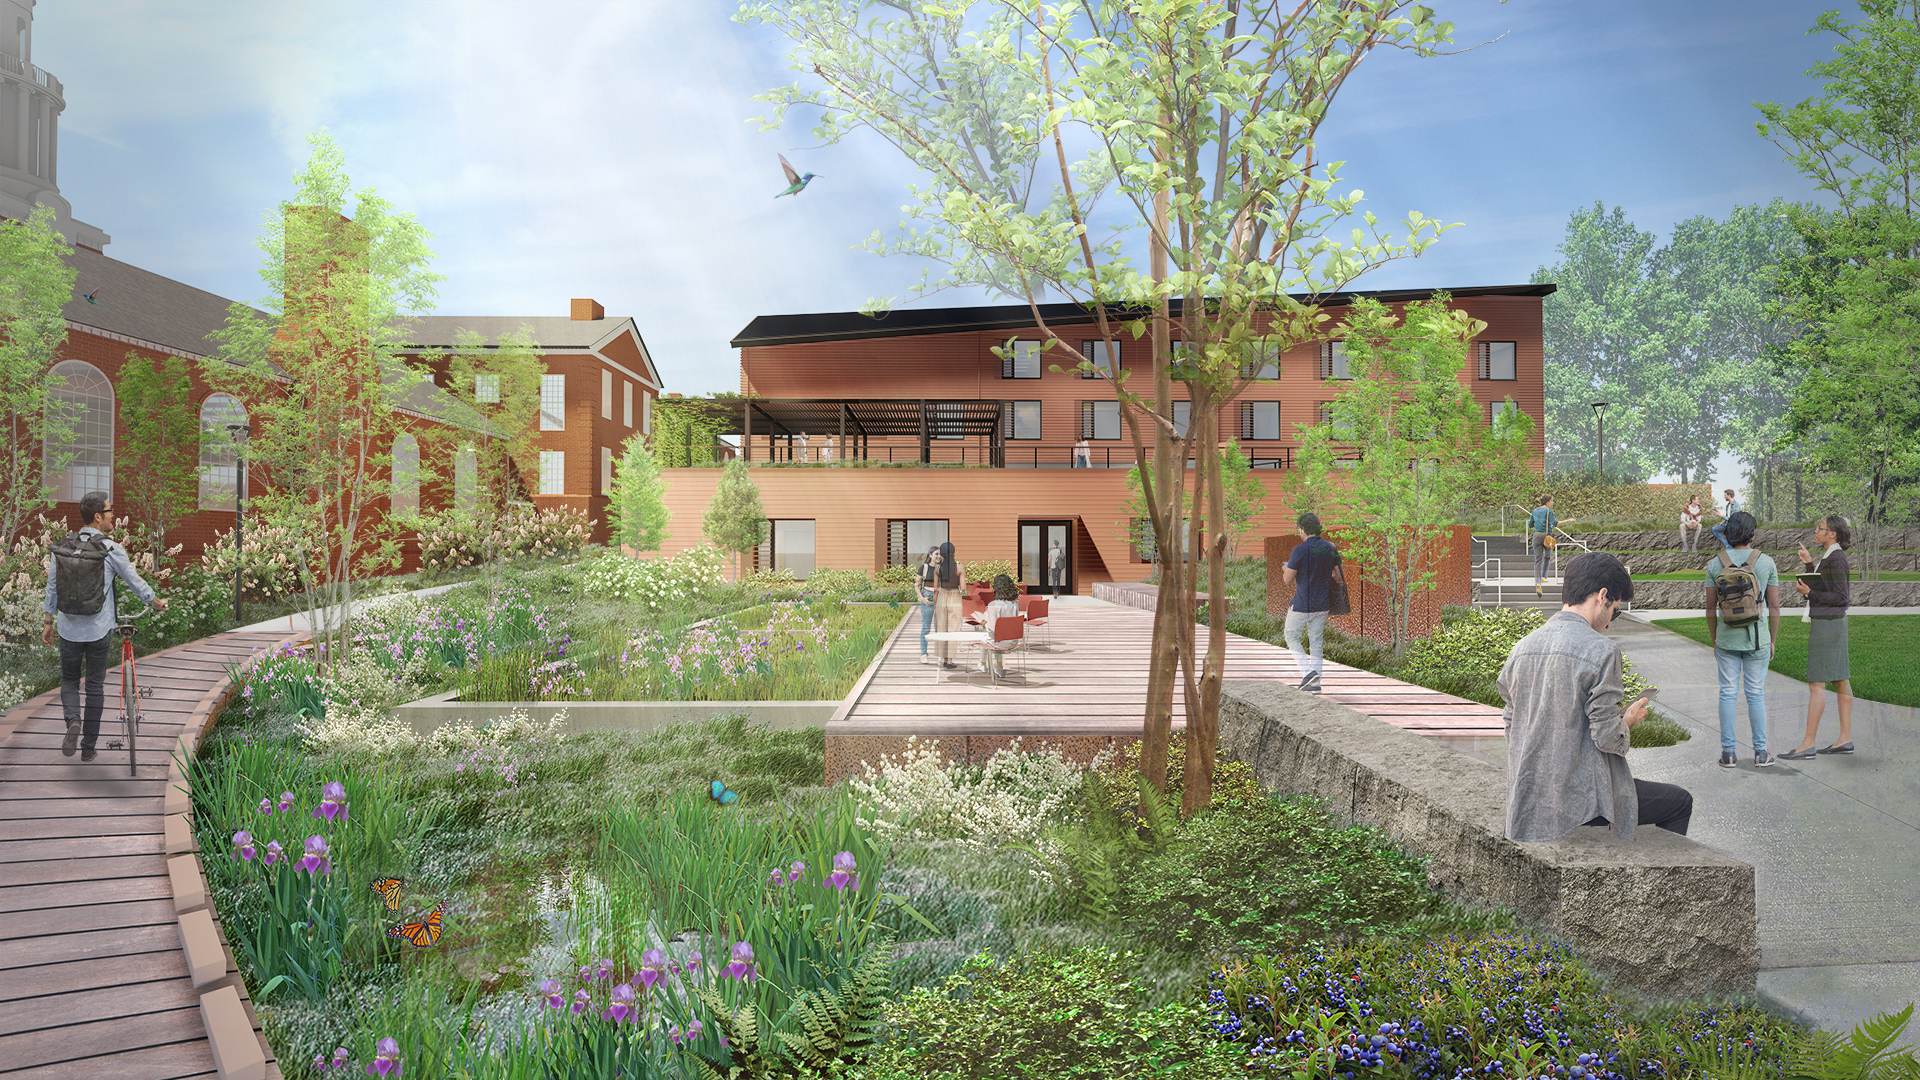 Yale University breaks ground on nation's largest Living Building student housing complex